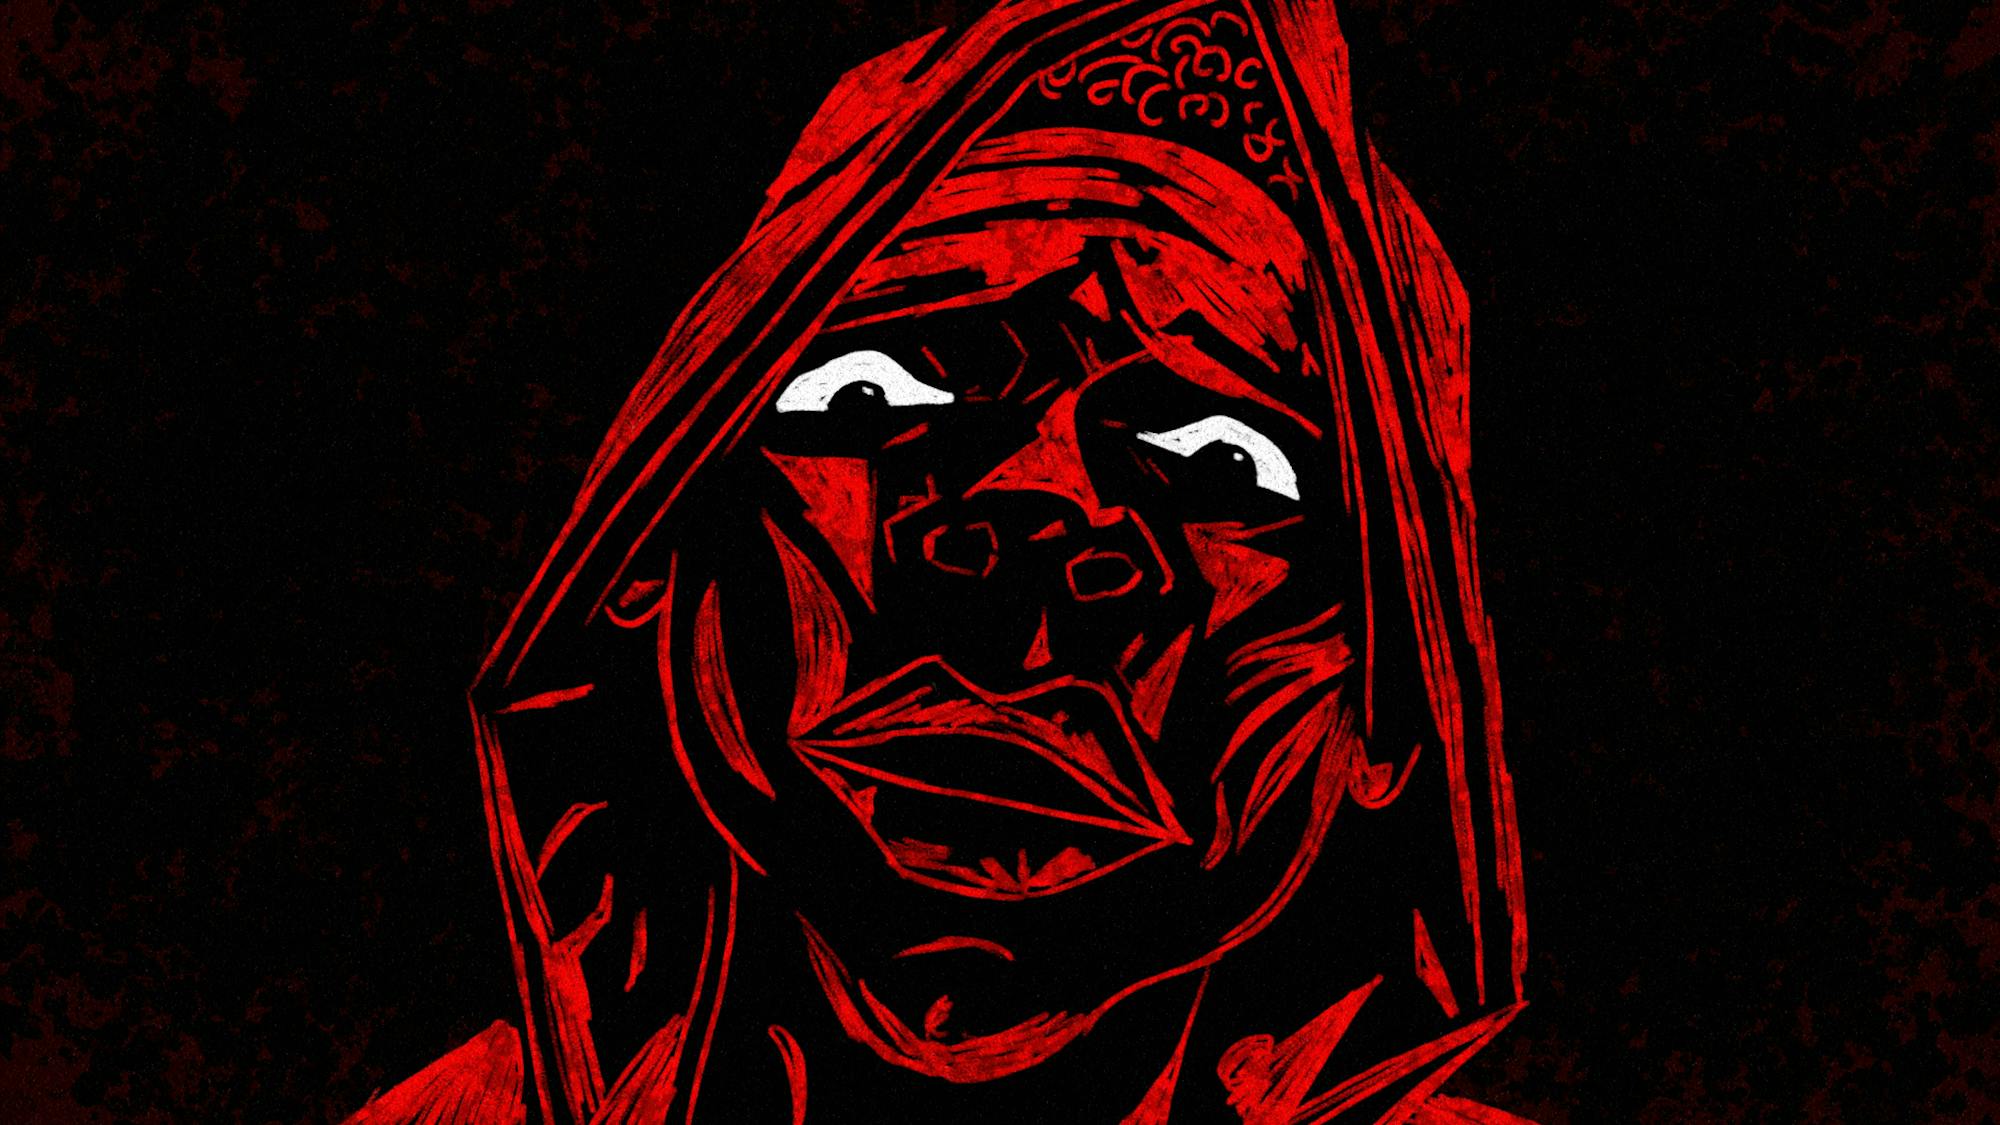 An illustration by Molecule VFX shows a face against a black background, details etched in a bright red. The eyes of the individual are particularly piercing, with black irises set against bright whites. In the film, the red light cast on this figure comes from the car of an assailant. The narration over the animation goes: “Now Black lives gettin’ robbed by wannabe cops.”